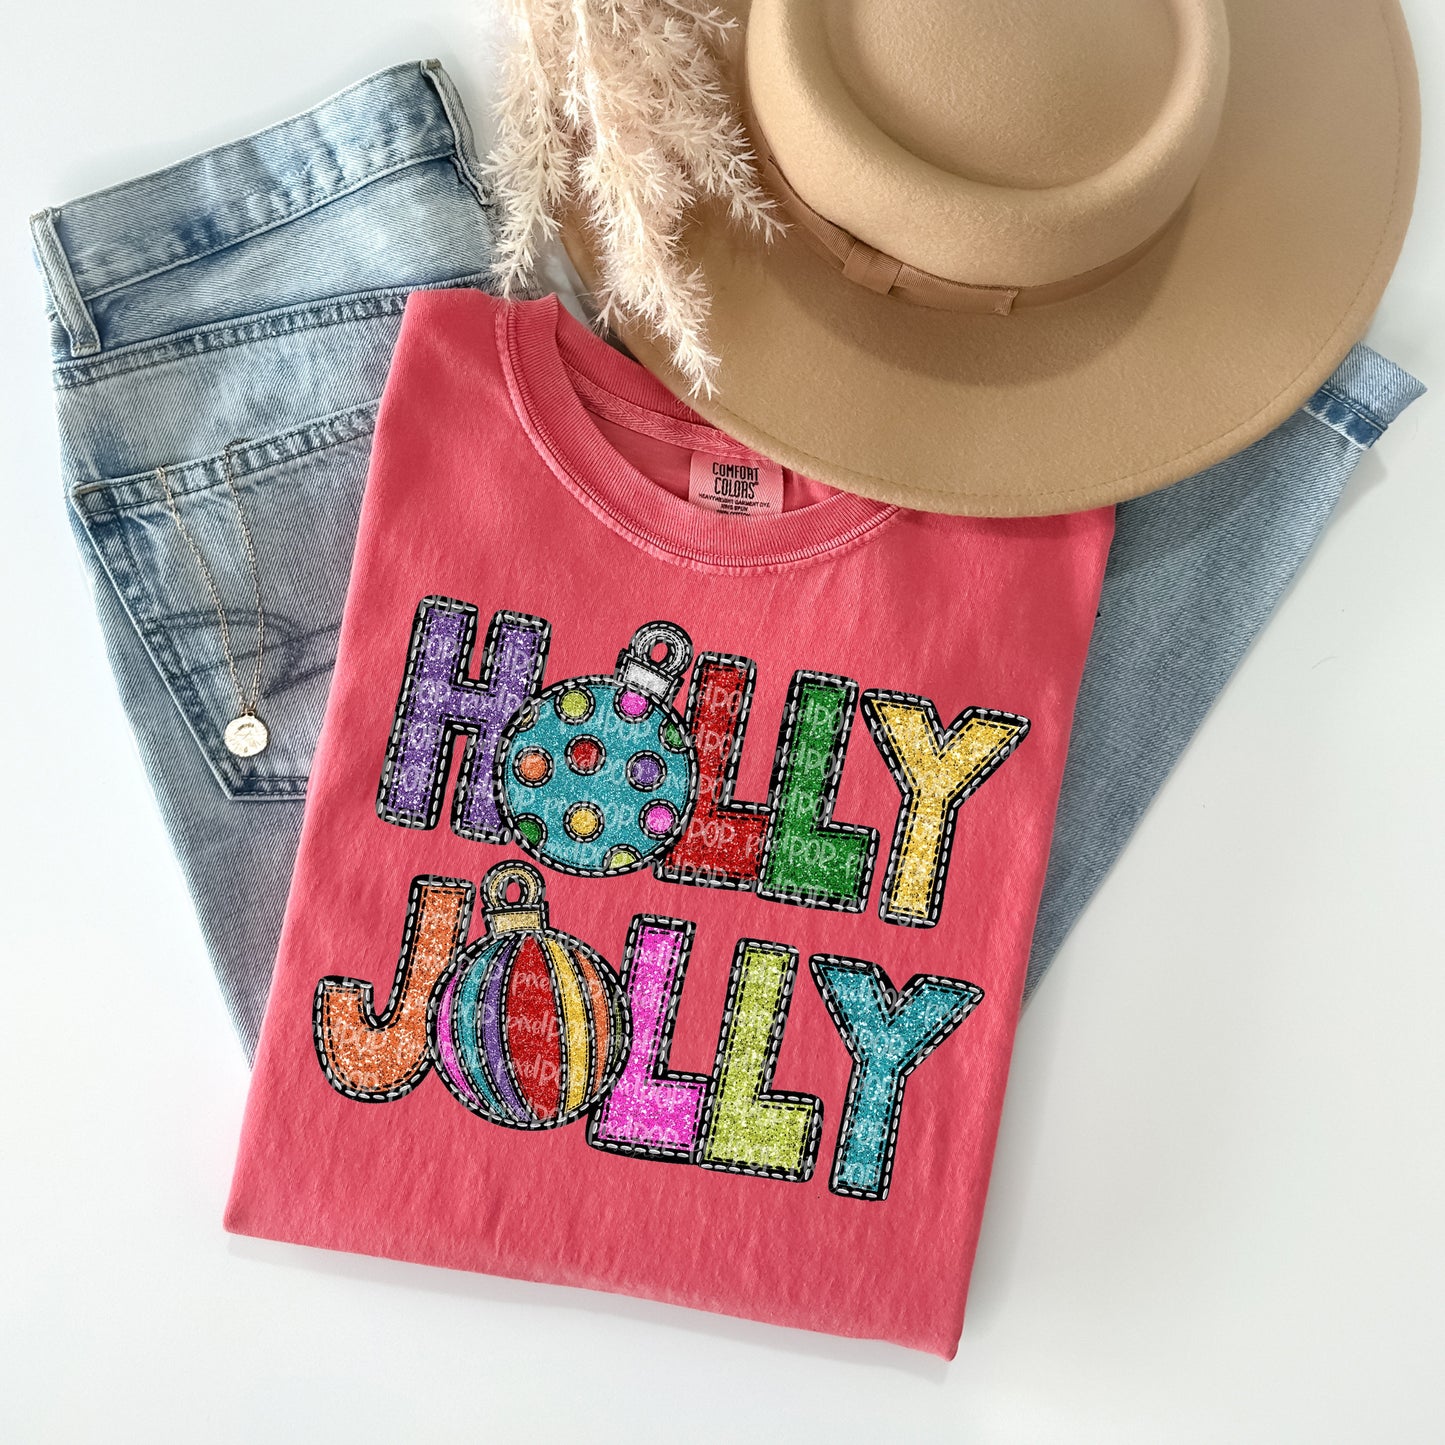 Holly Jolly Faux Glitter Graphic Tee